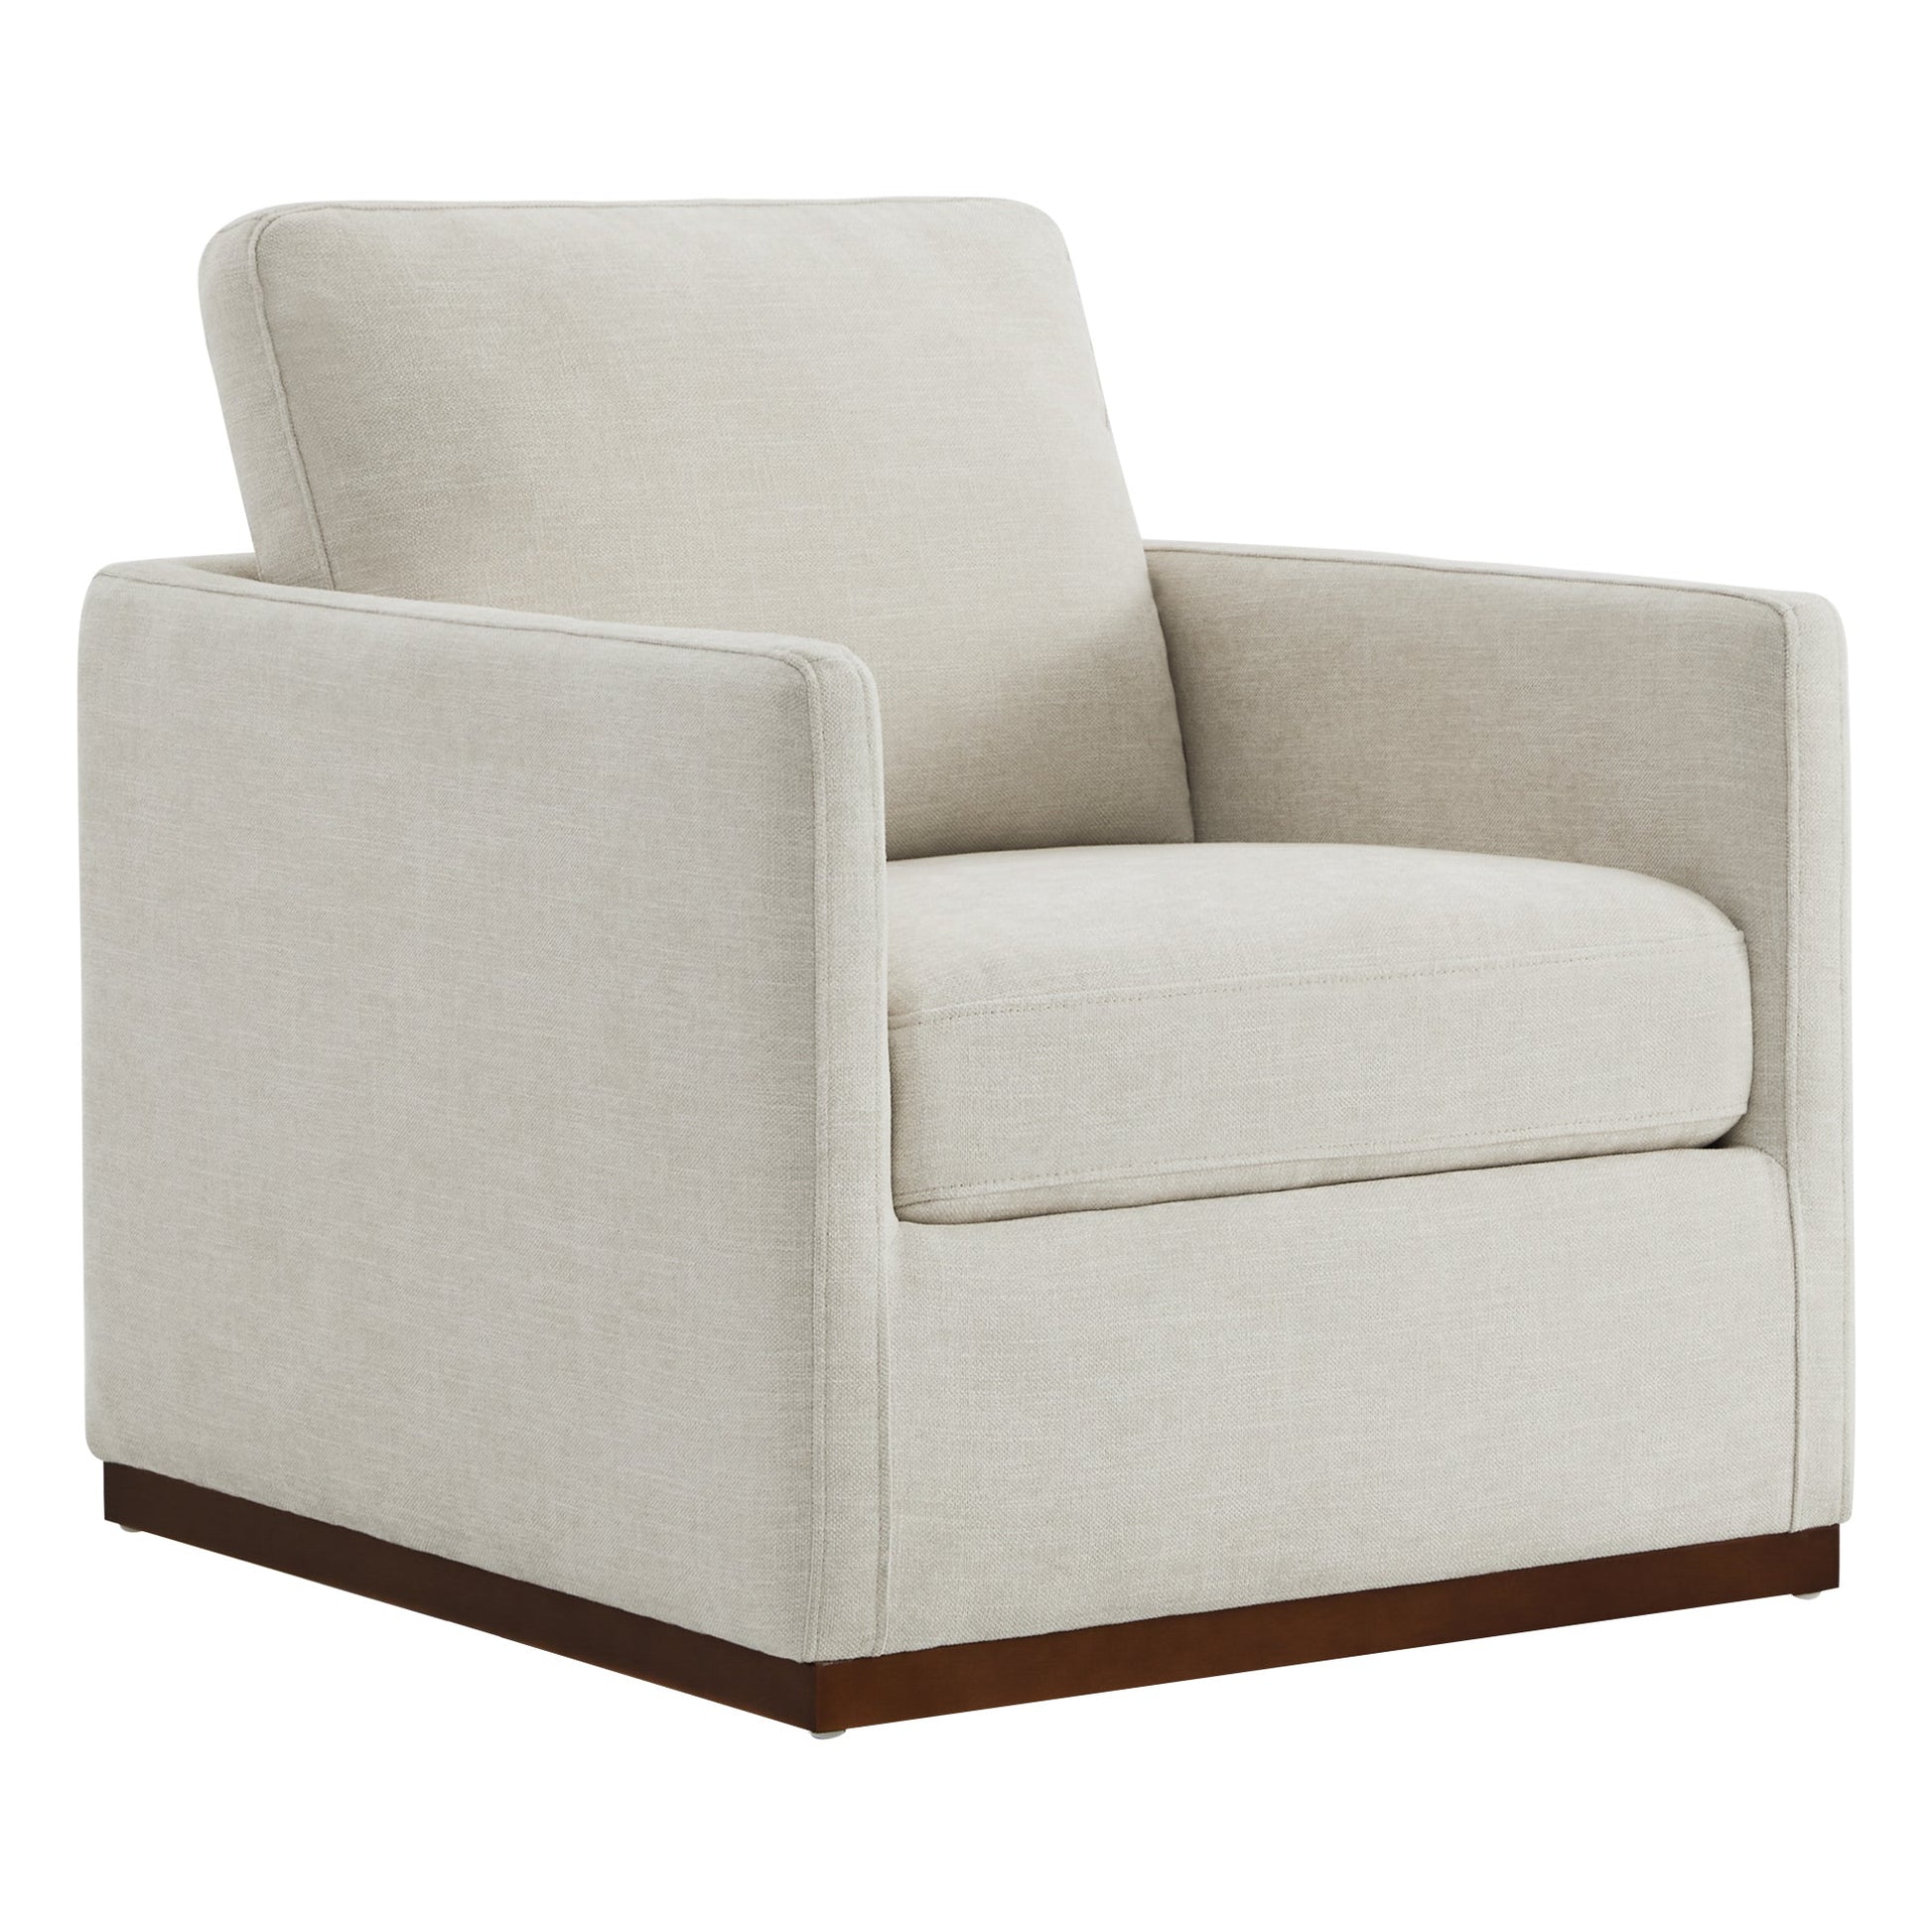 CHITA LIVING-Henry Swivel Accent Chair-Accent Chair-Fabric-Linen-